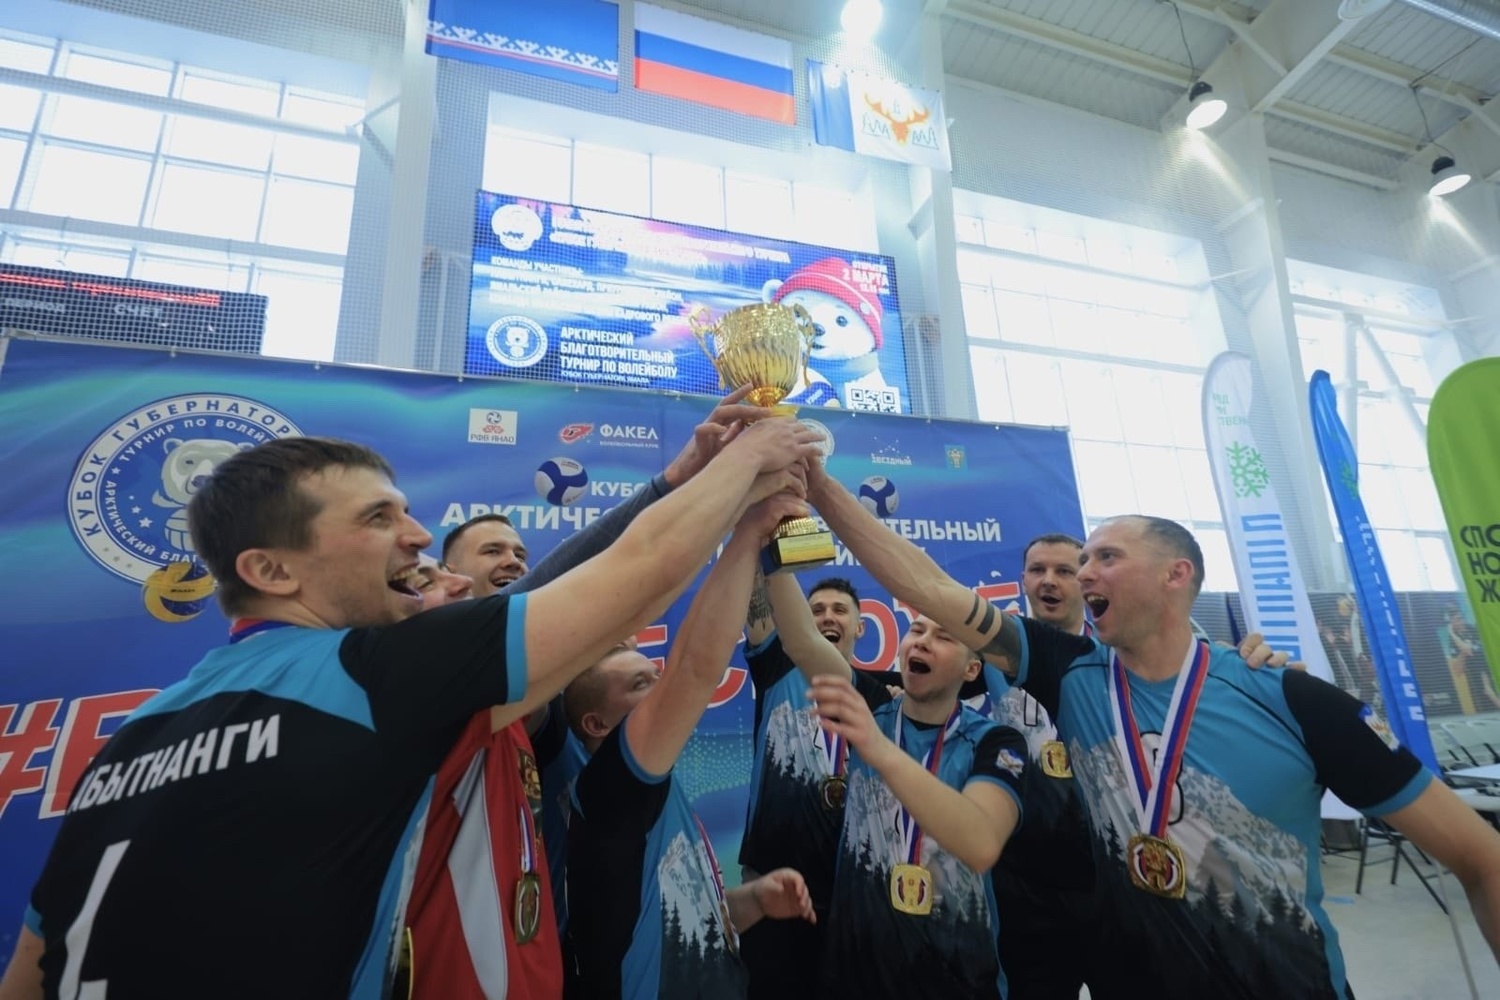 The gas workers' team won the Yamal Governor's Volleyball Cup